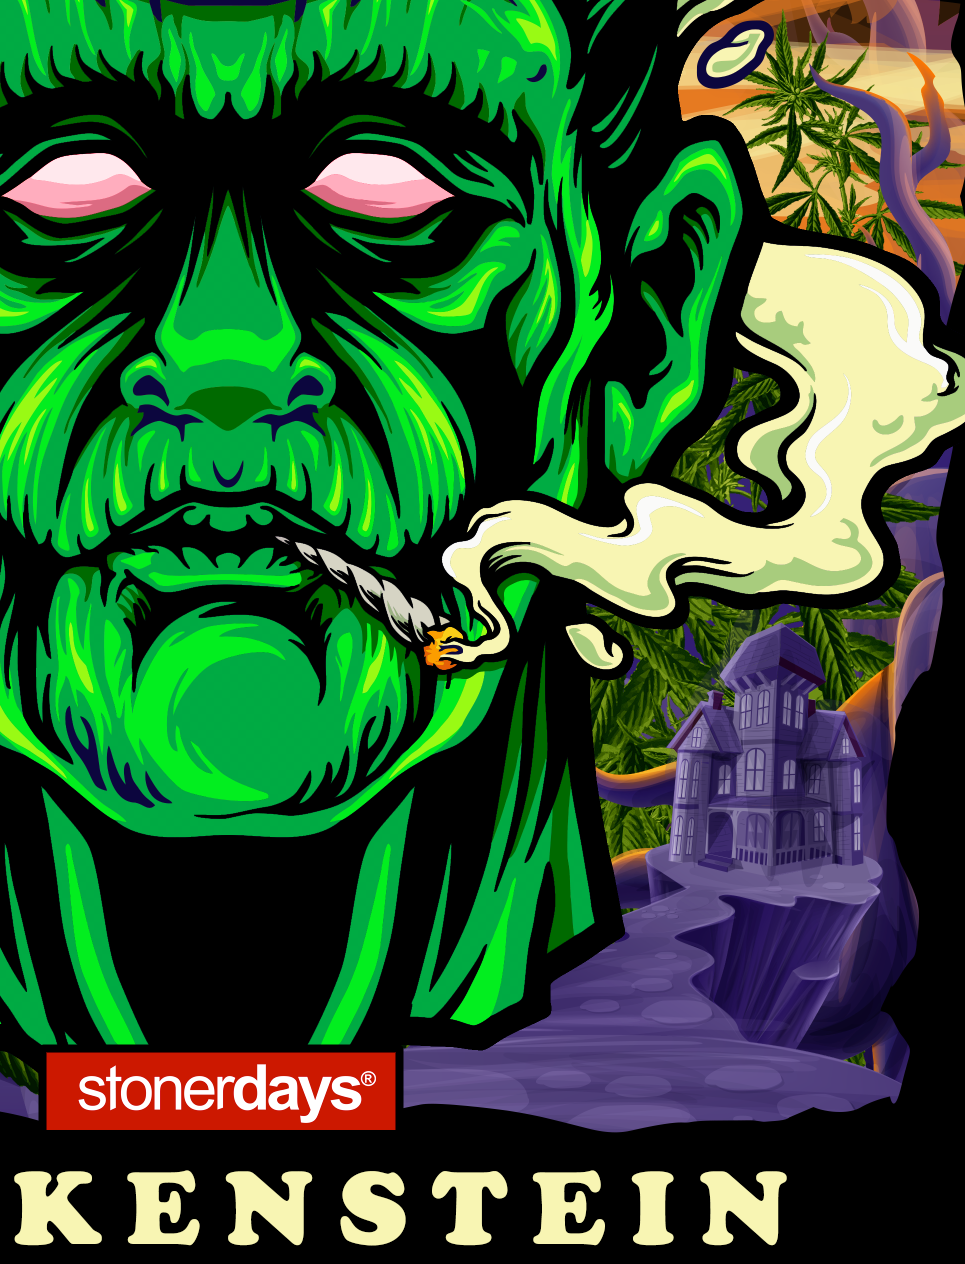 StonerDays Dankenstein Tie Dye T-Shirt featuring a vibrant green monster smoking, with a spooky house backdrop.